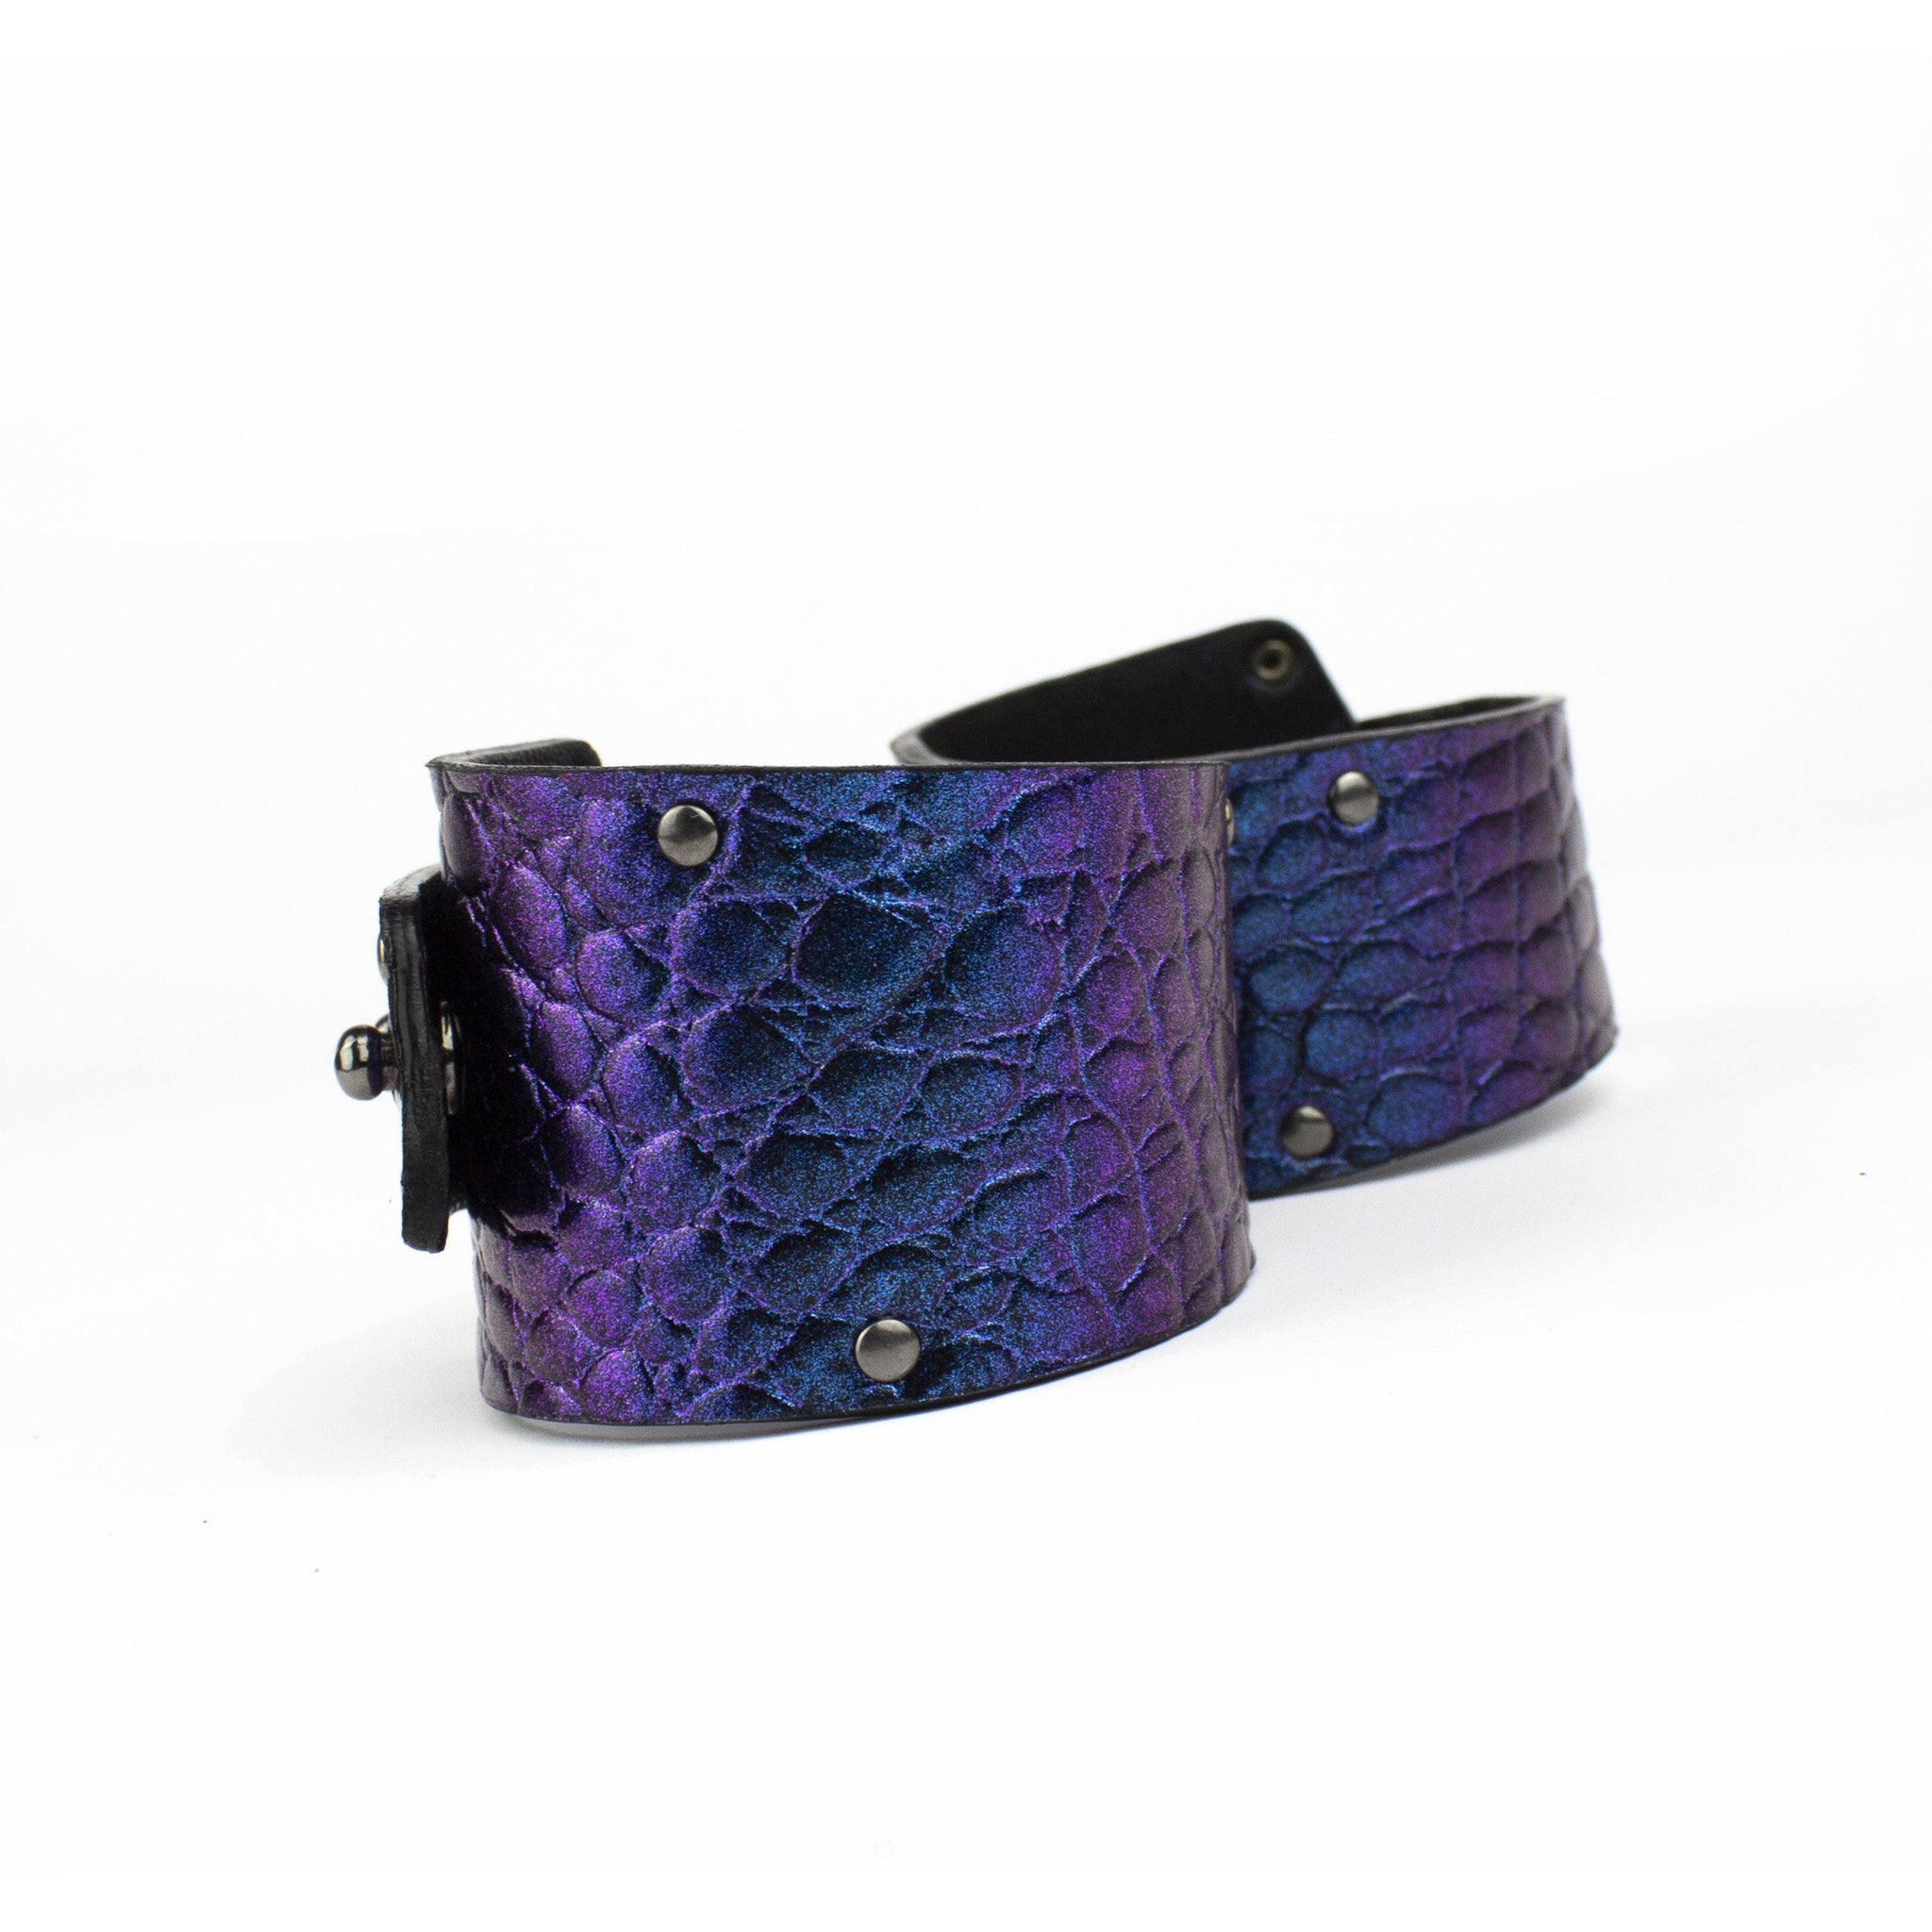 Women's leather wide cuff bracelet bangles rainbow blue-bangles, blue, blue leather, Bracelet, chameleon, colorful, colourful, cuff, designer, designer jewelry, geometric, holo, holographic, holographic leather, iridescent, Jewelry, leather bracelet, leather jewelry, minimal, rainbow, recycled, steampunk, studded, wide, with studs-Mimikri